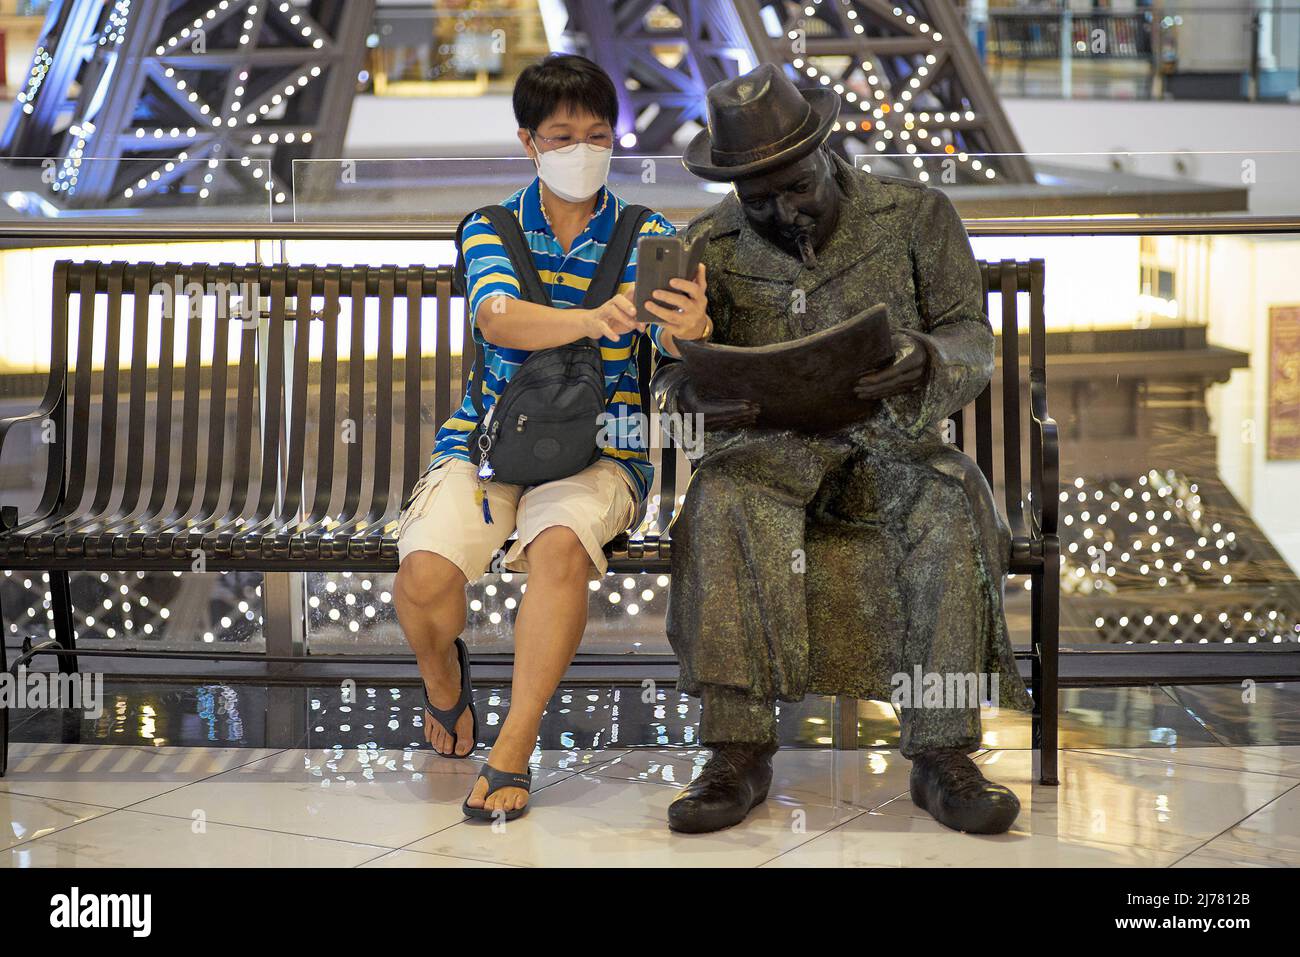 Selfie with famous people. Woman taking selfie photograph alongside a reading statue of Winston Churchill Stock Photo